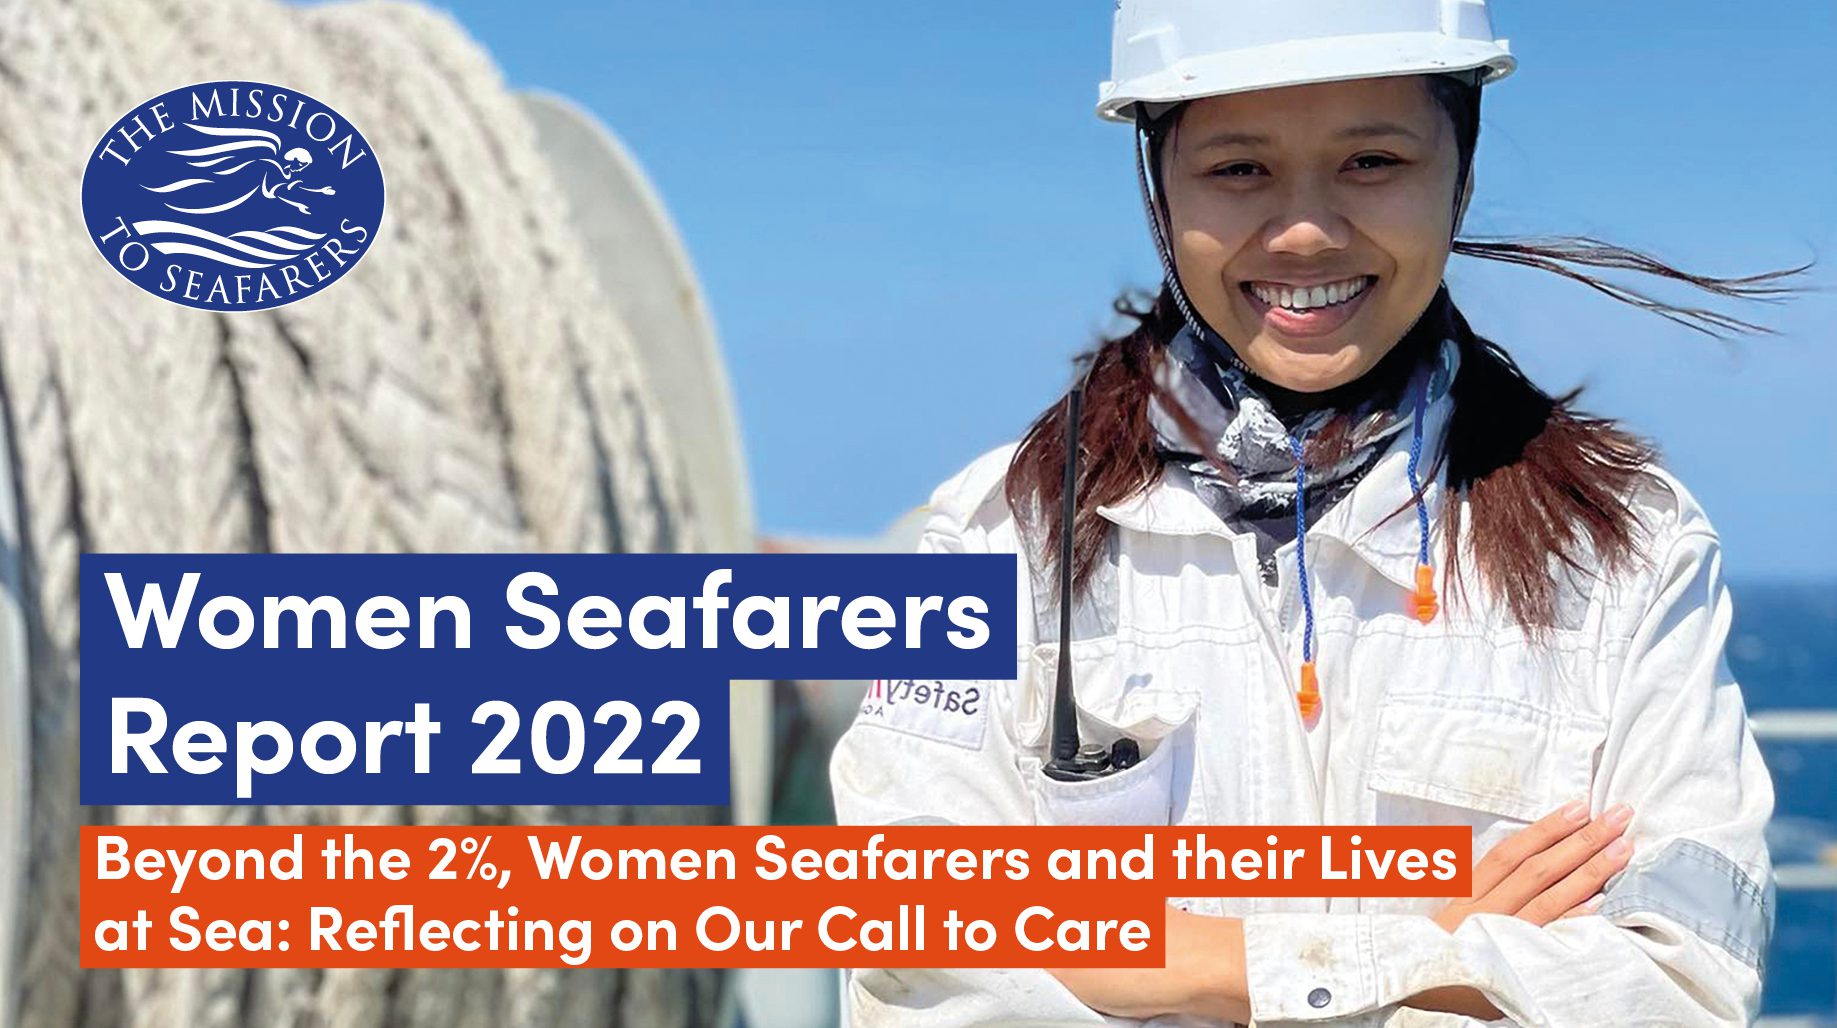 Report explores key challenges faced by women seafarers